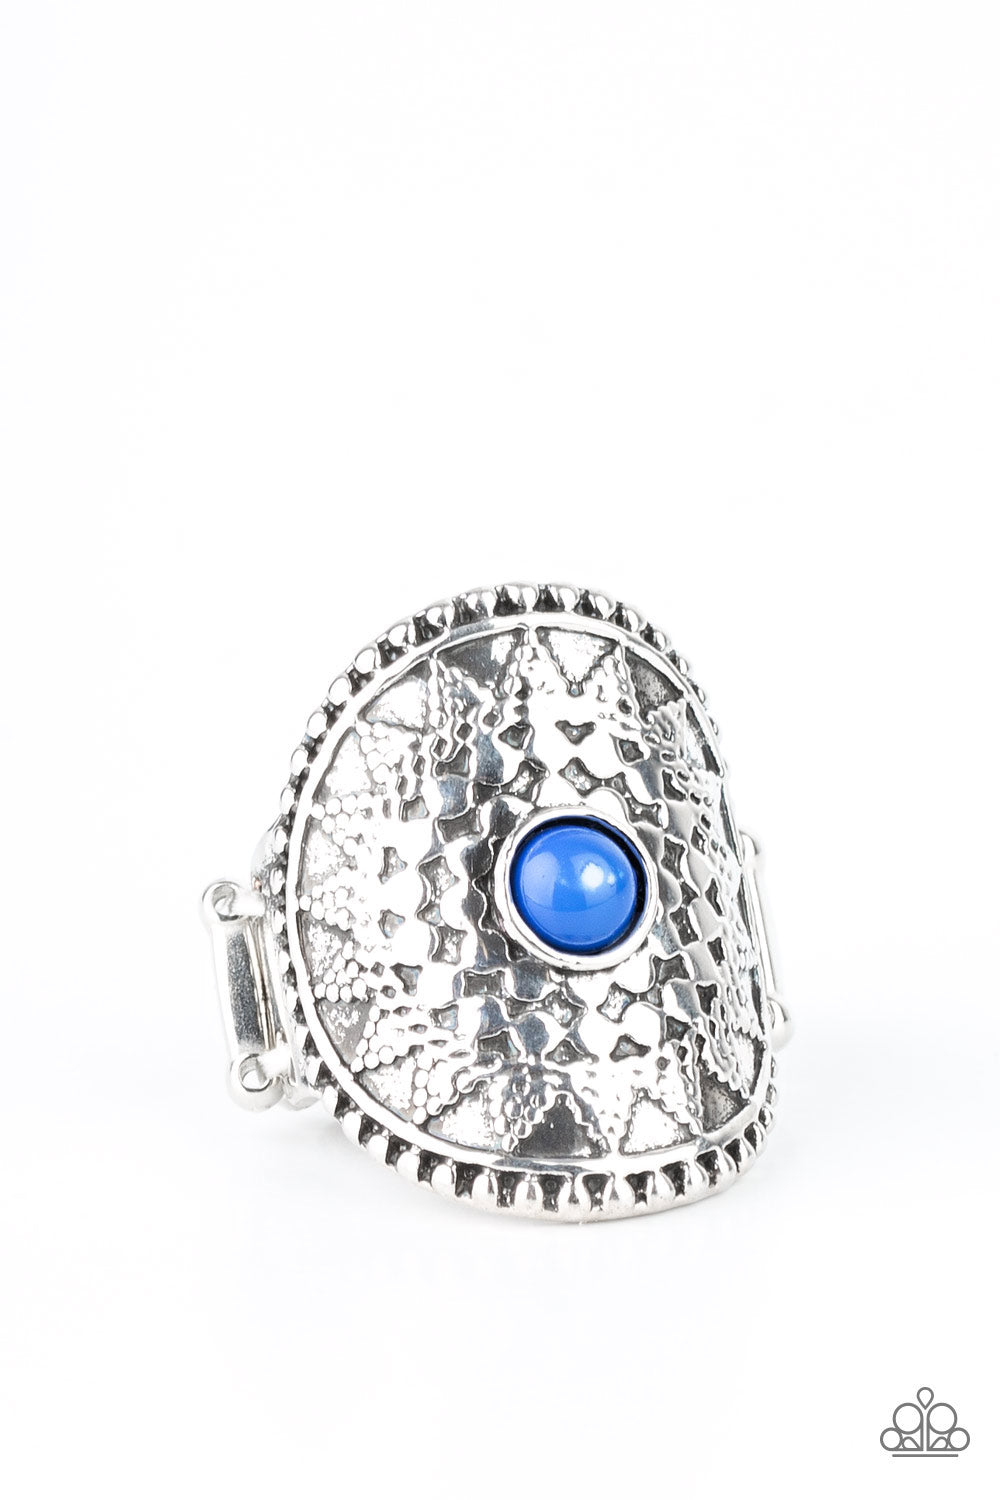 five-dollar-jewelry-mojave-rays-blue-ring-paparazzi-accessories